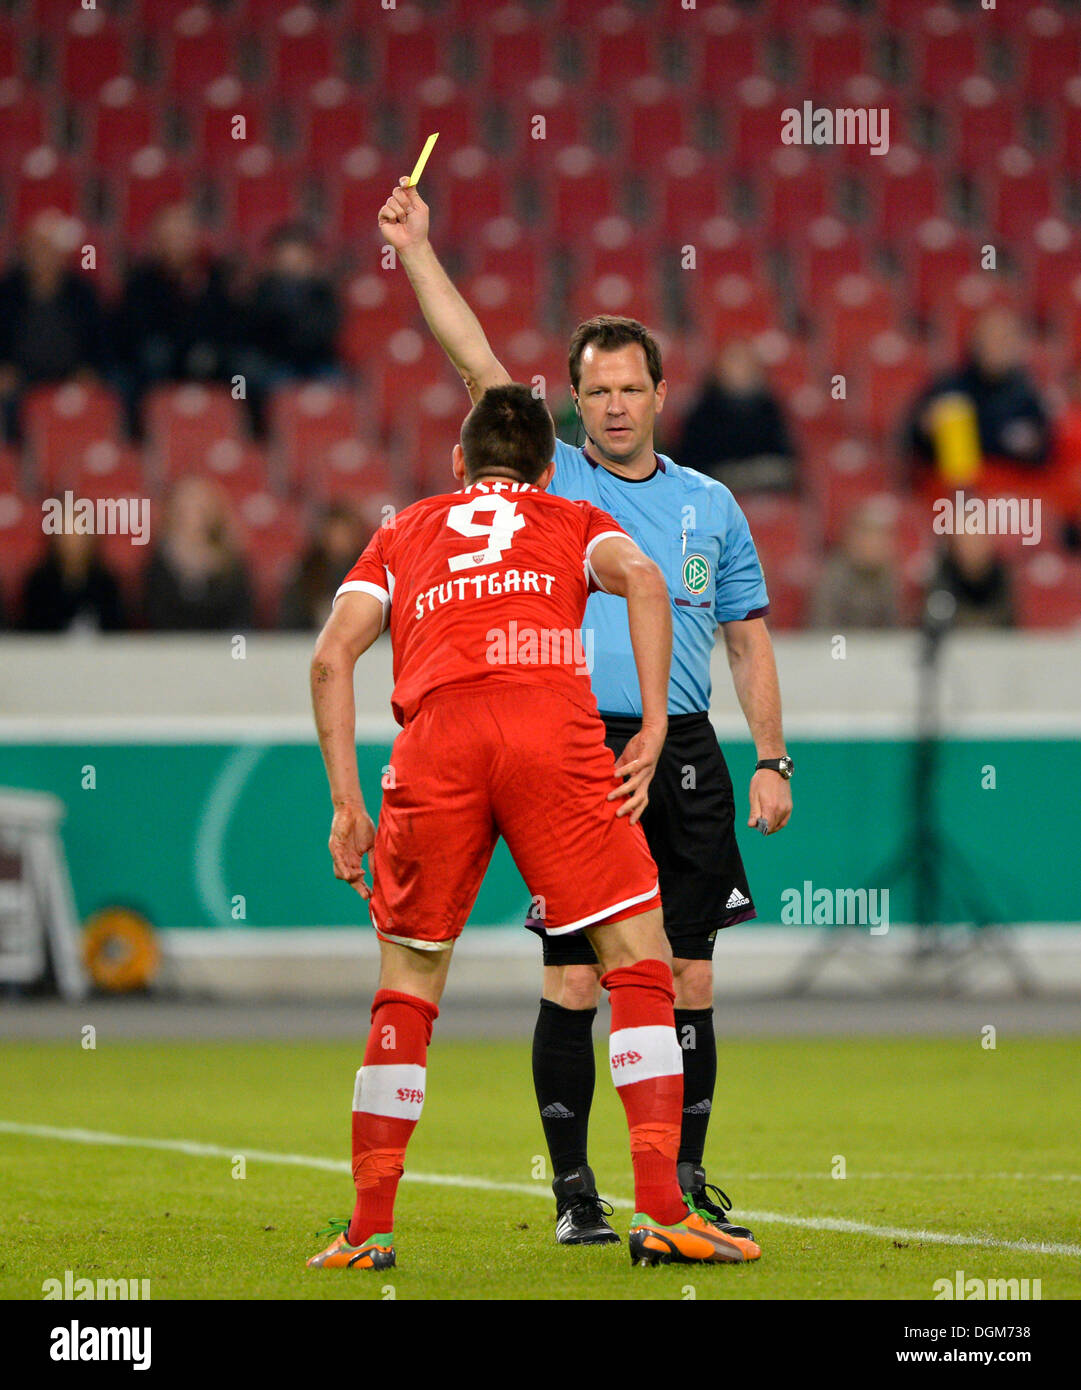 Vedad Ibisevic, VfB Stuttgart, receiving a yellow card from the referee Peter Sippel, Mercedes-Benz Arena, Stuttgart Stock Photo